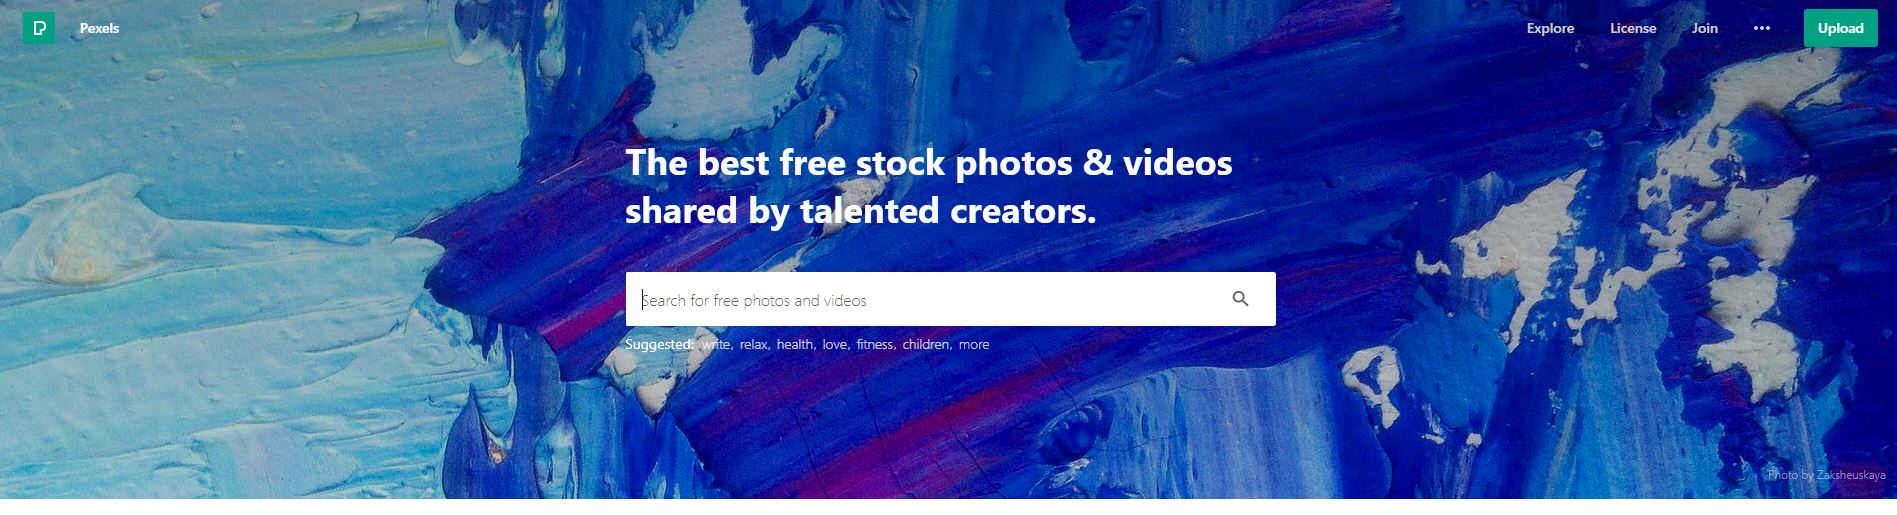 The best free stock photos and videos shared by talented creators